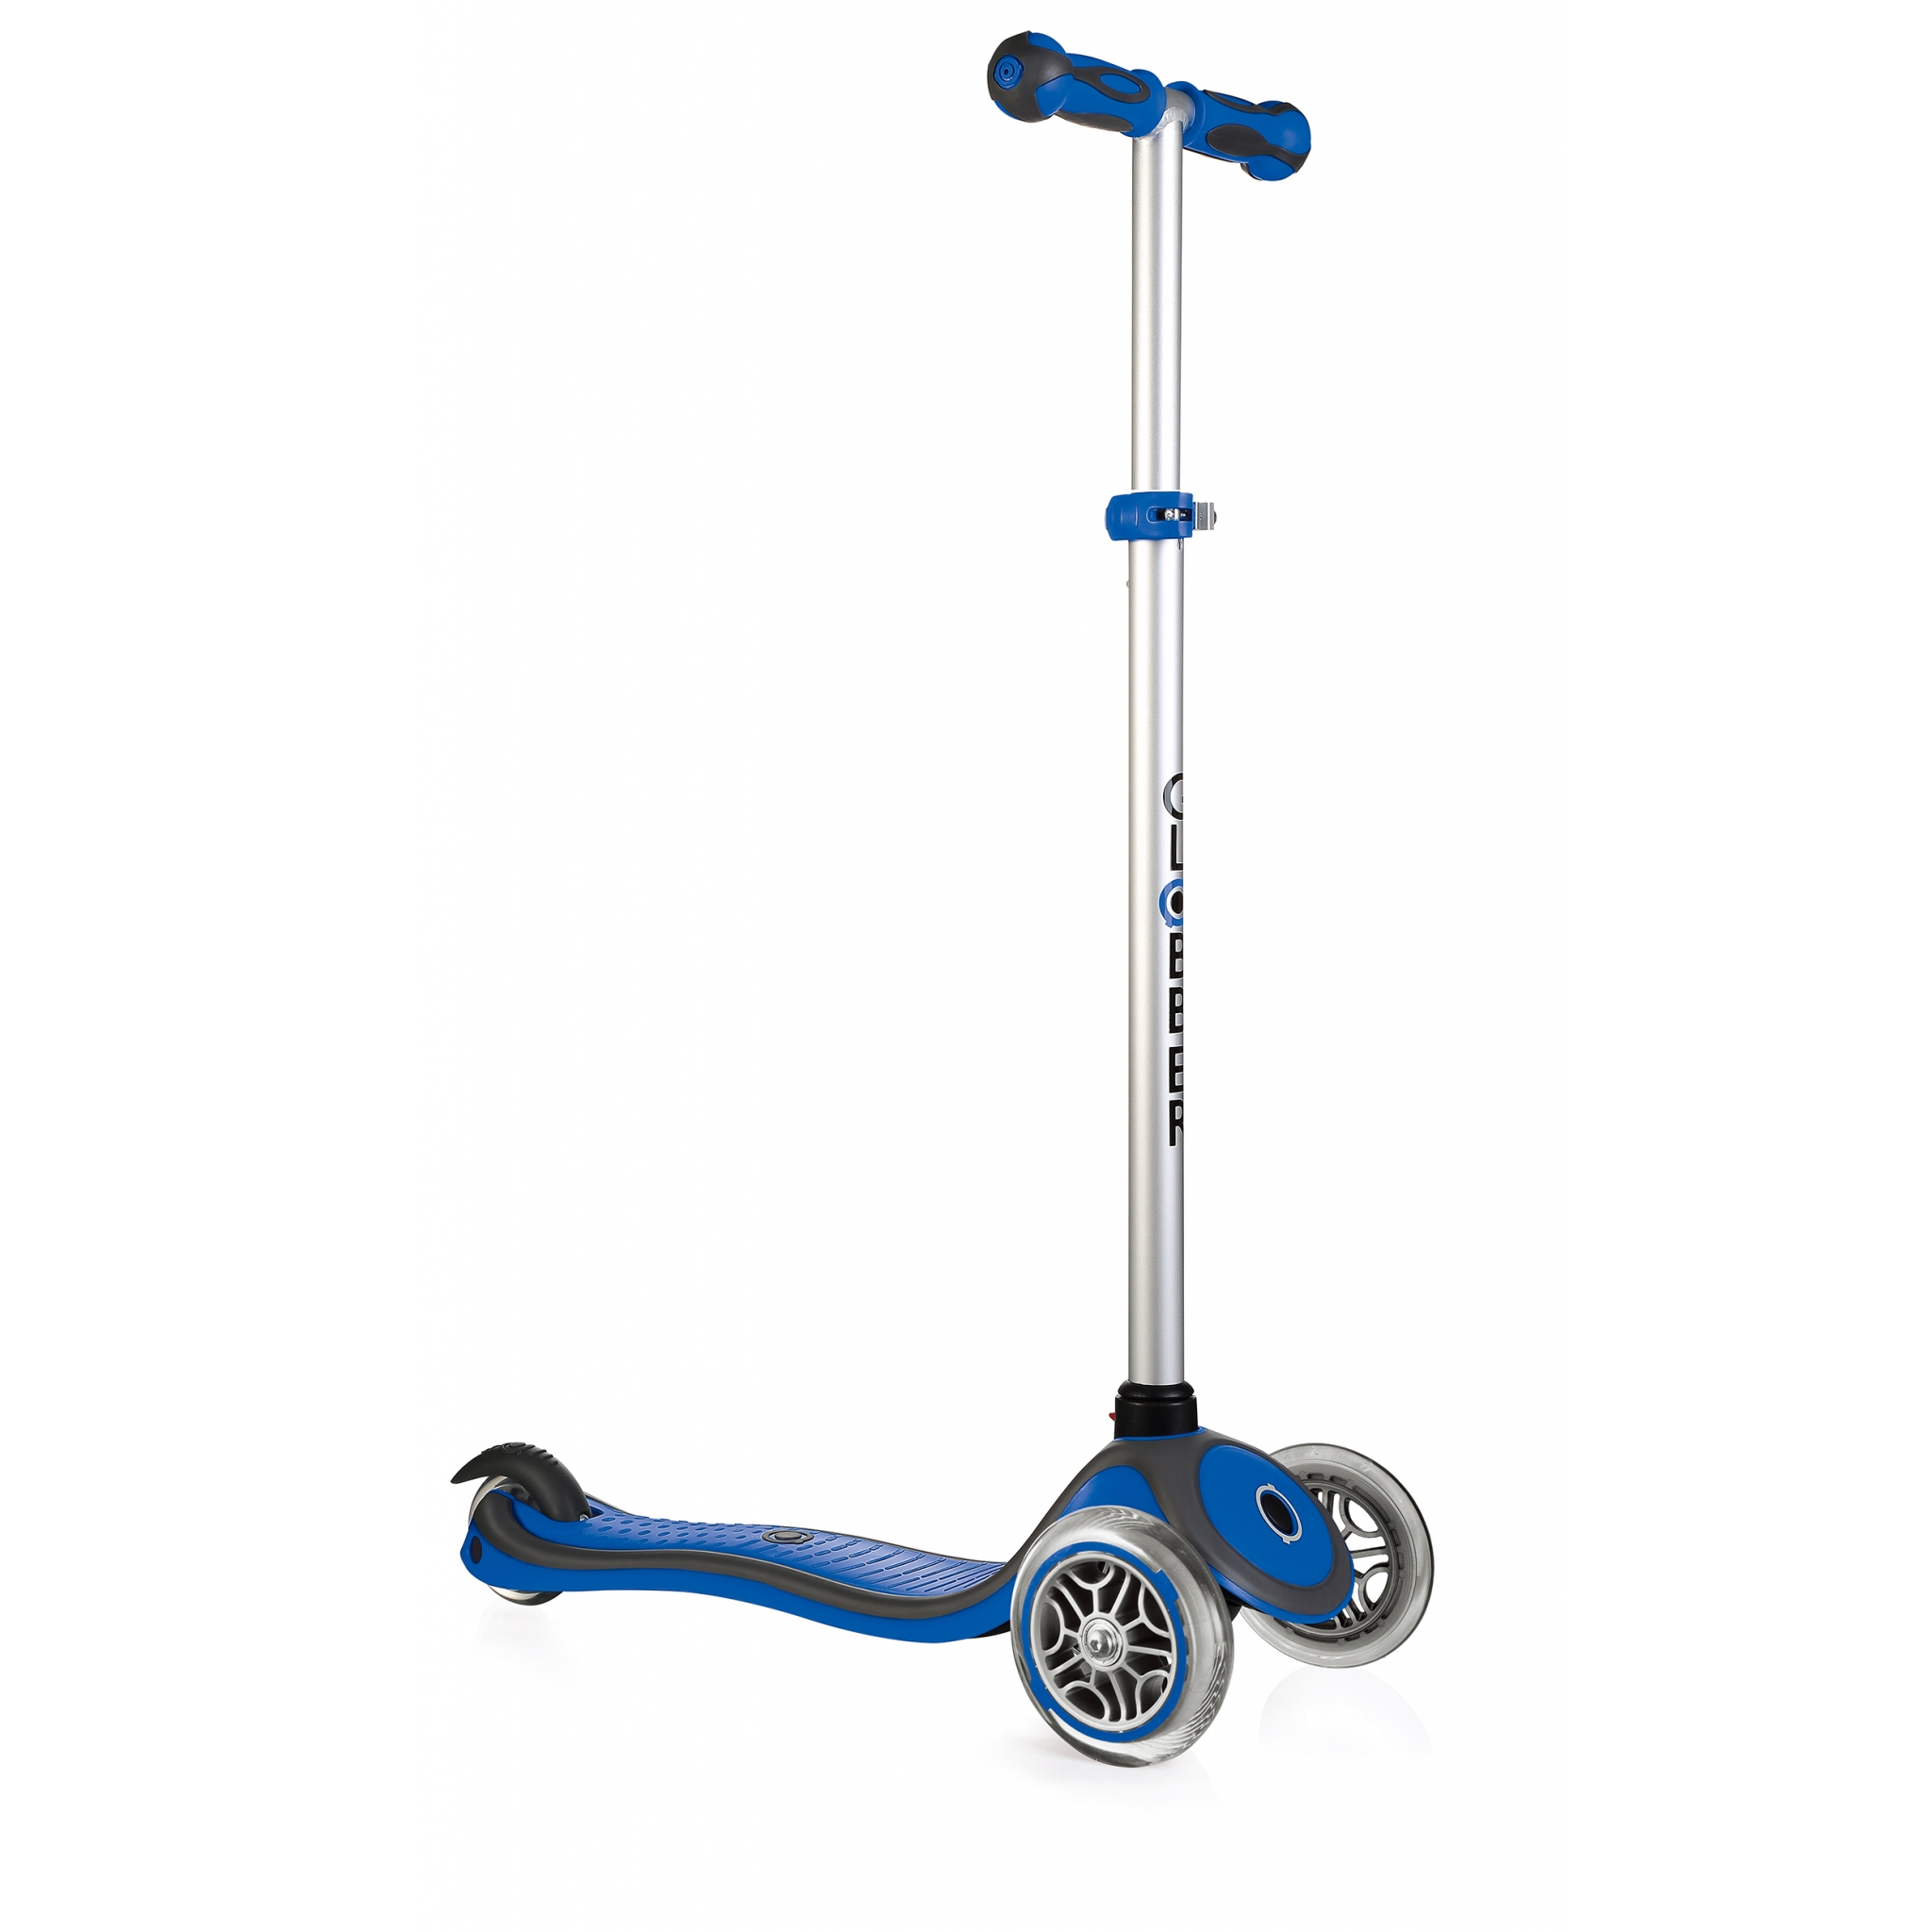 Globber PRIMO PLUS 3-wheel scooter for kids - height adjustable scooter,  patented steering lock button for easy learning. - Globber Germany